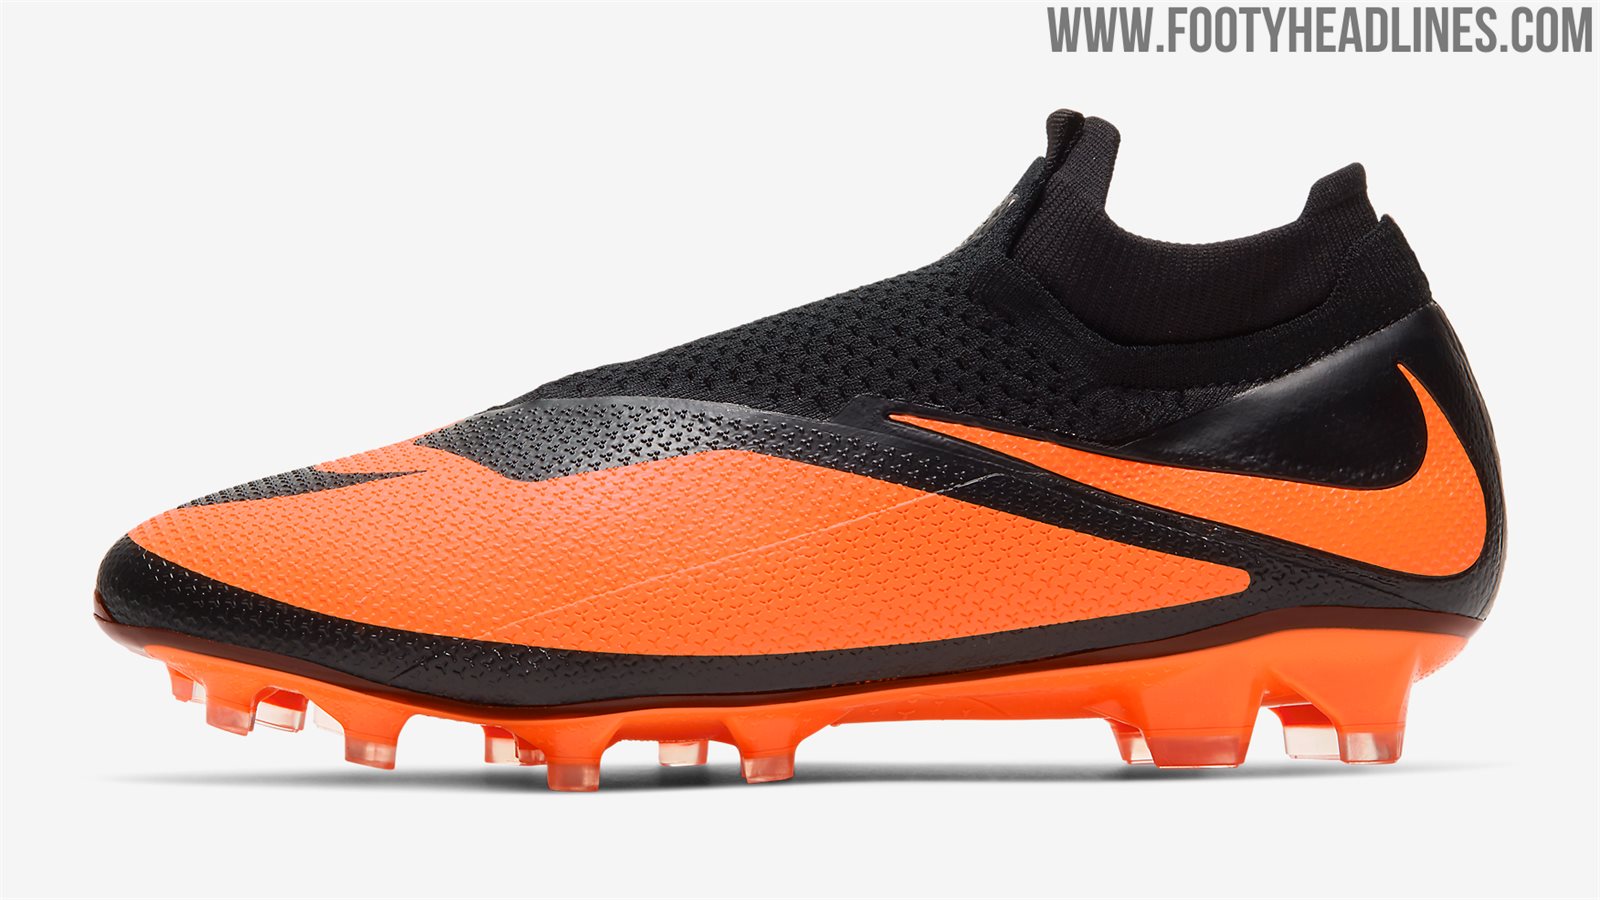 Retro-Inspired Nike Future DNA Football Boots Pack Released - Footy ...